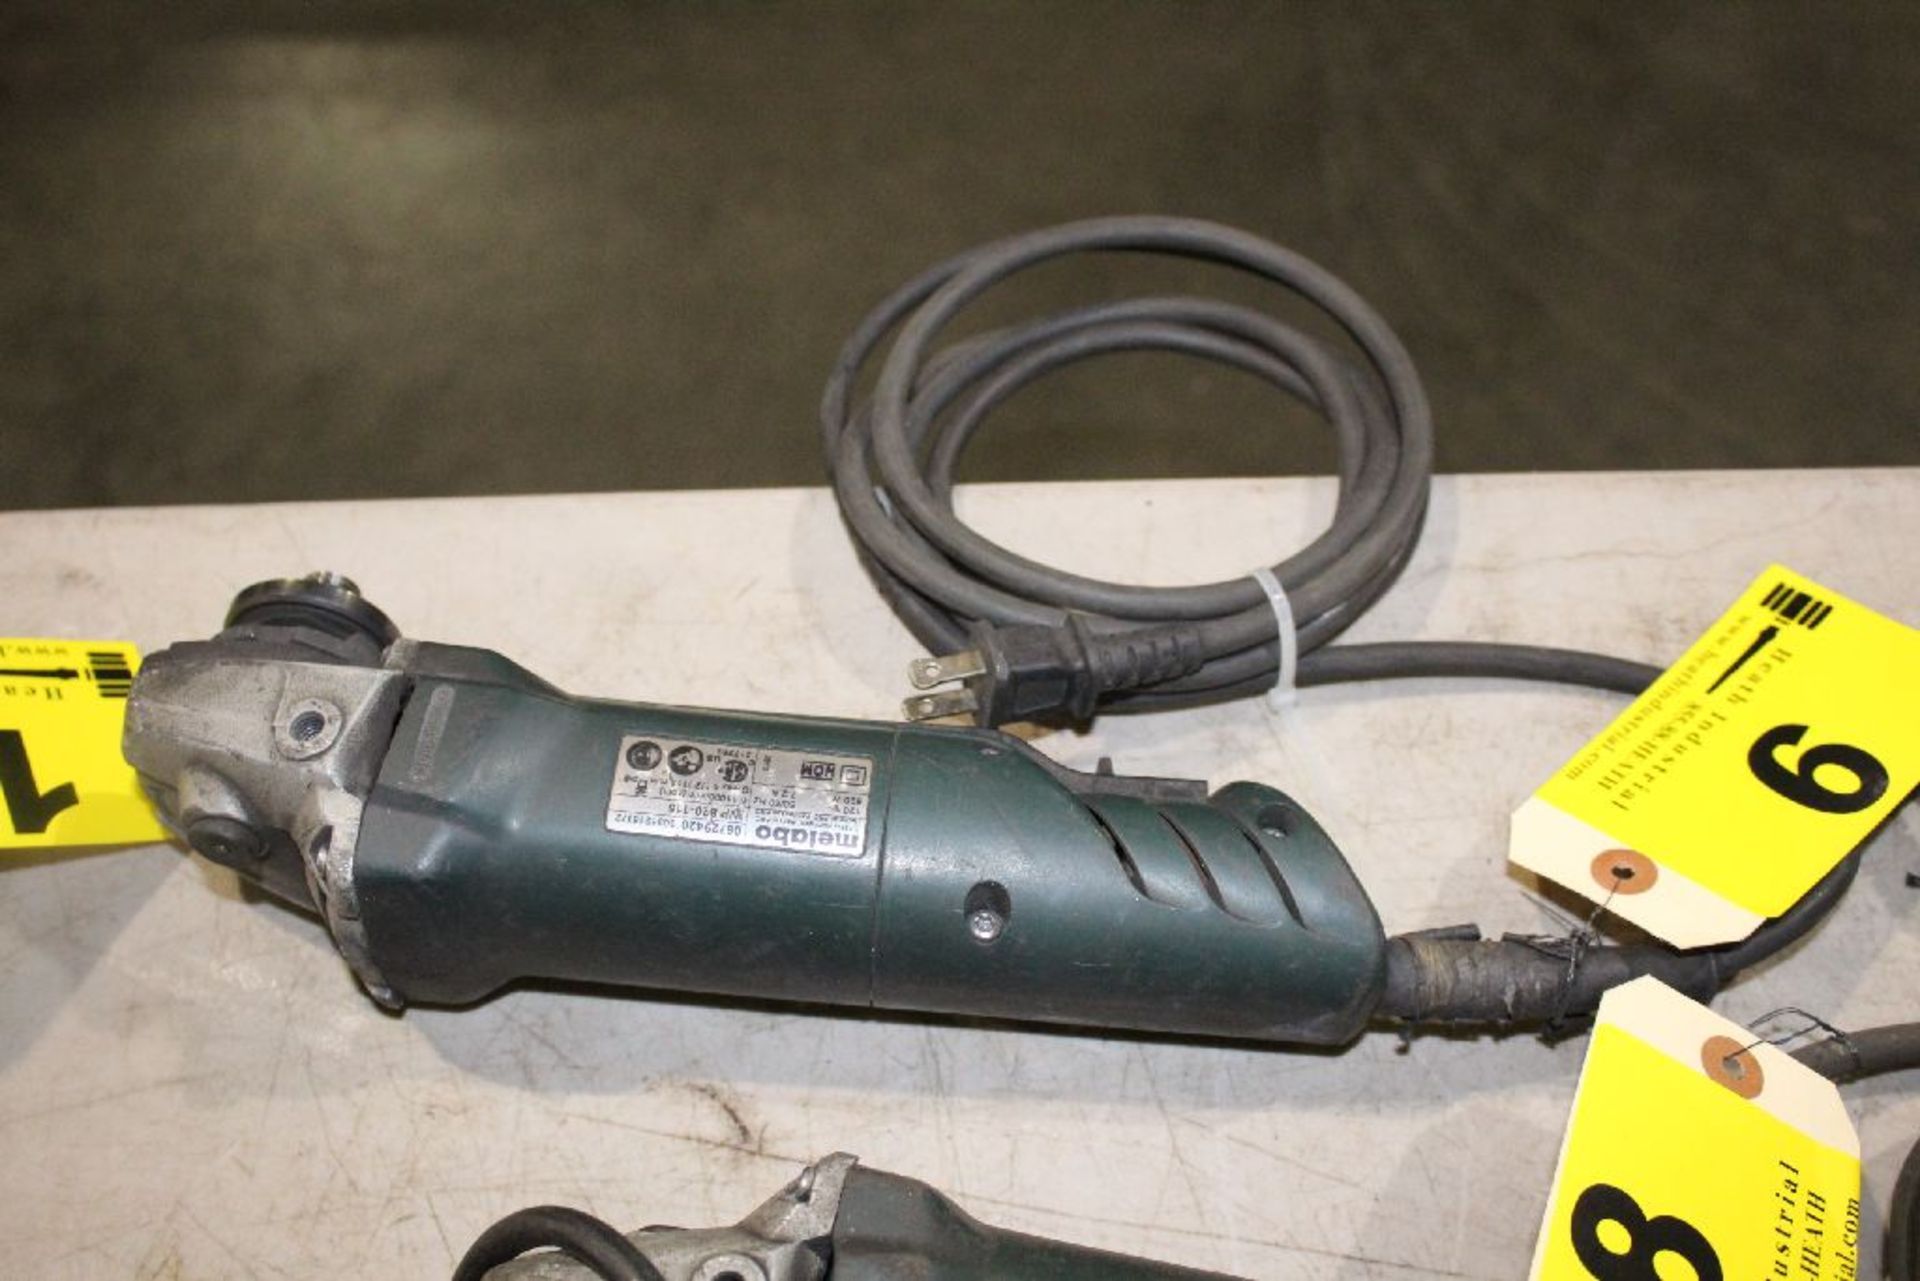 METABO MODEL W820-115 4-1/2" RIGHT ANGLE GRINDER